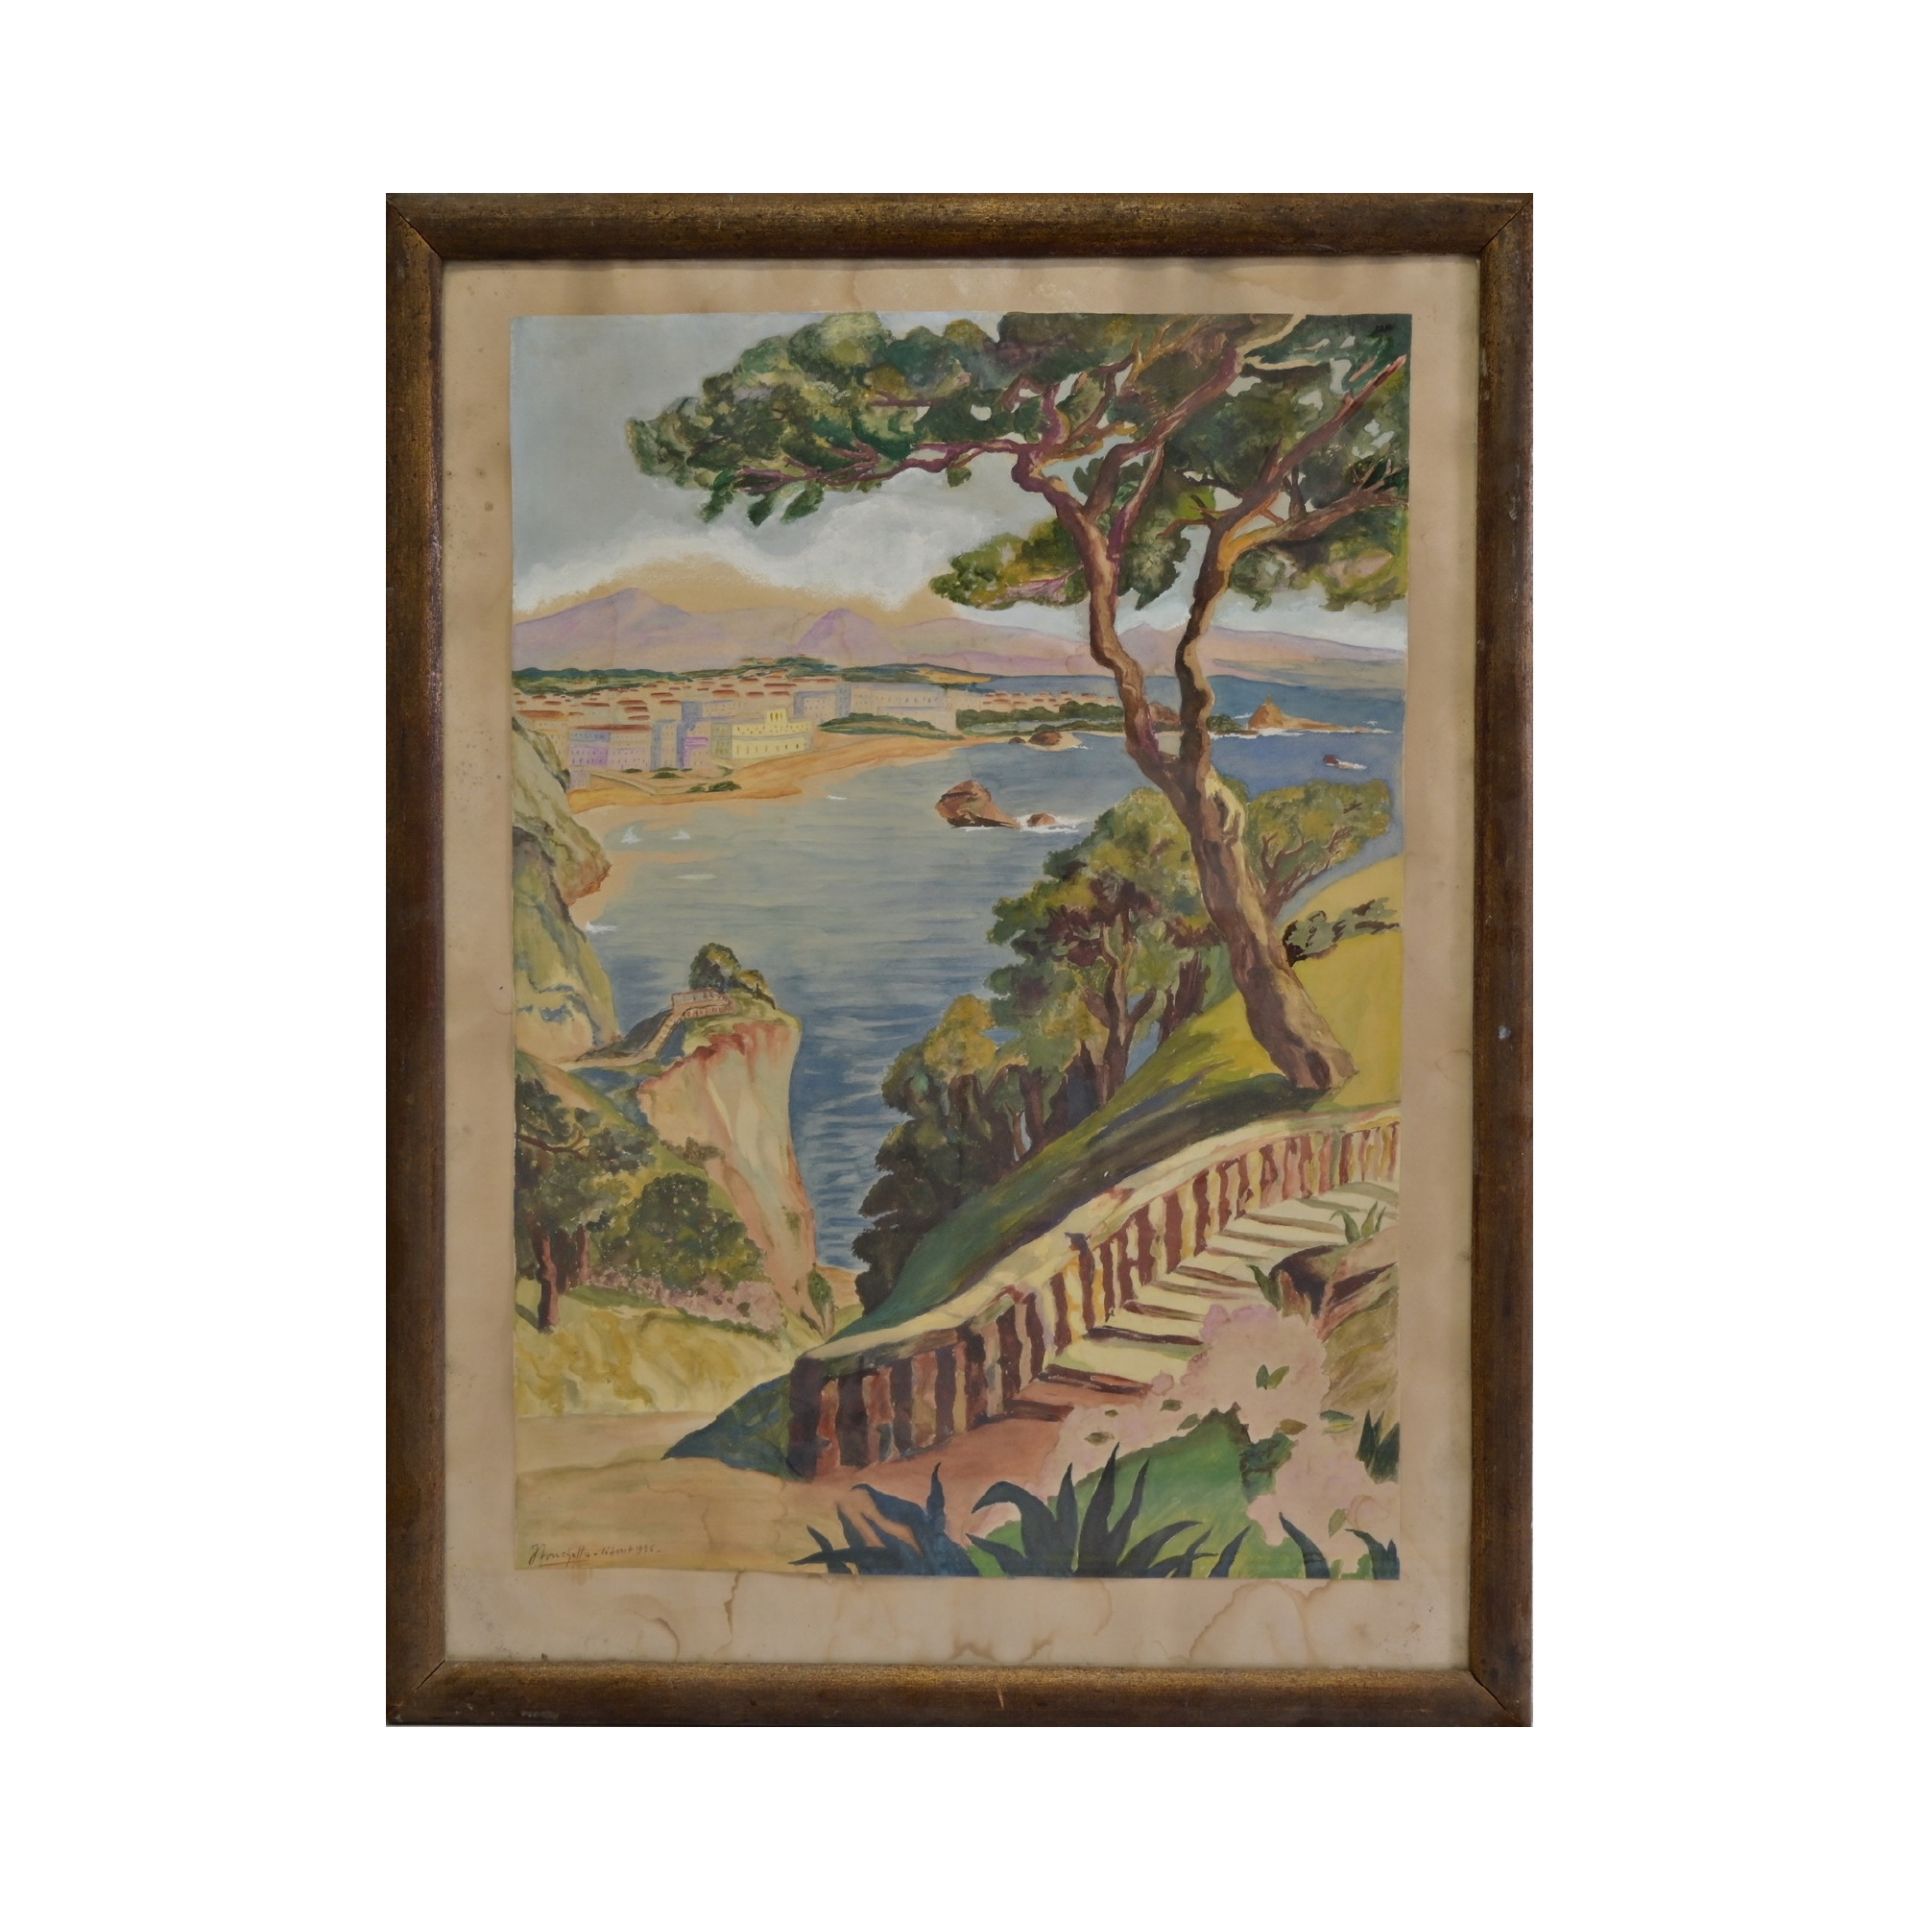 "French Riviera" 1936, watercolor on paper, signed by J Fruchetto, French Painting of the 20th C.